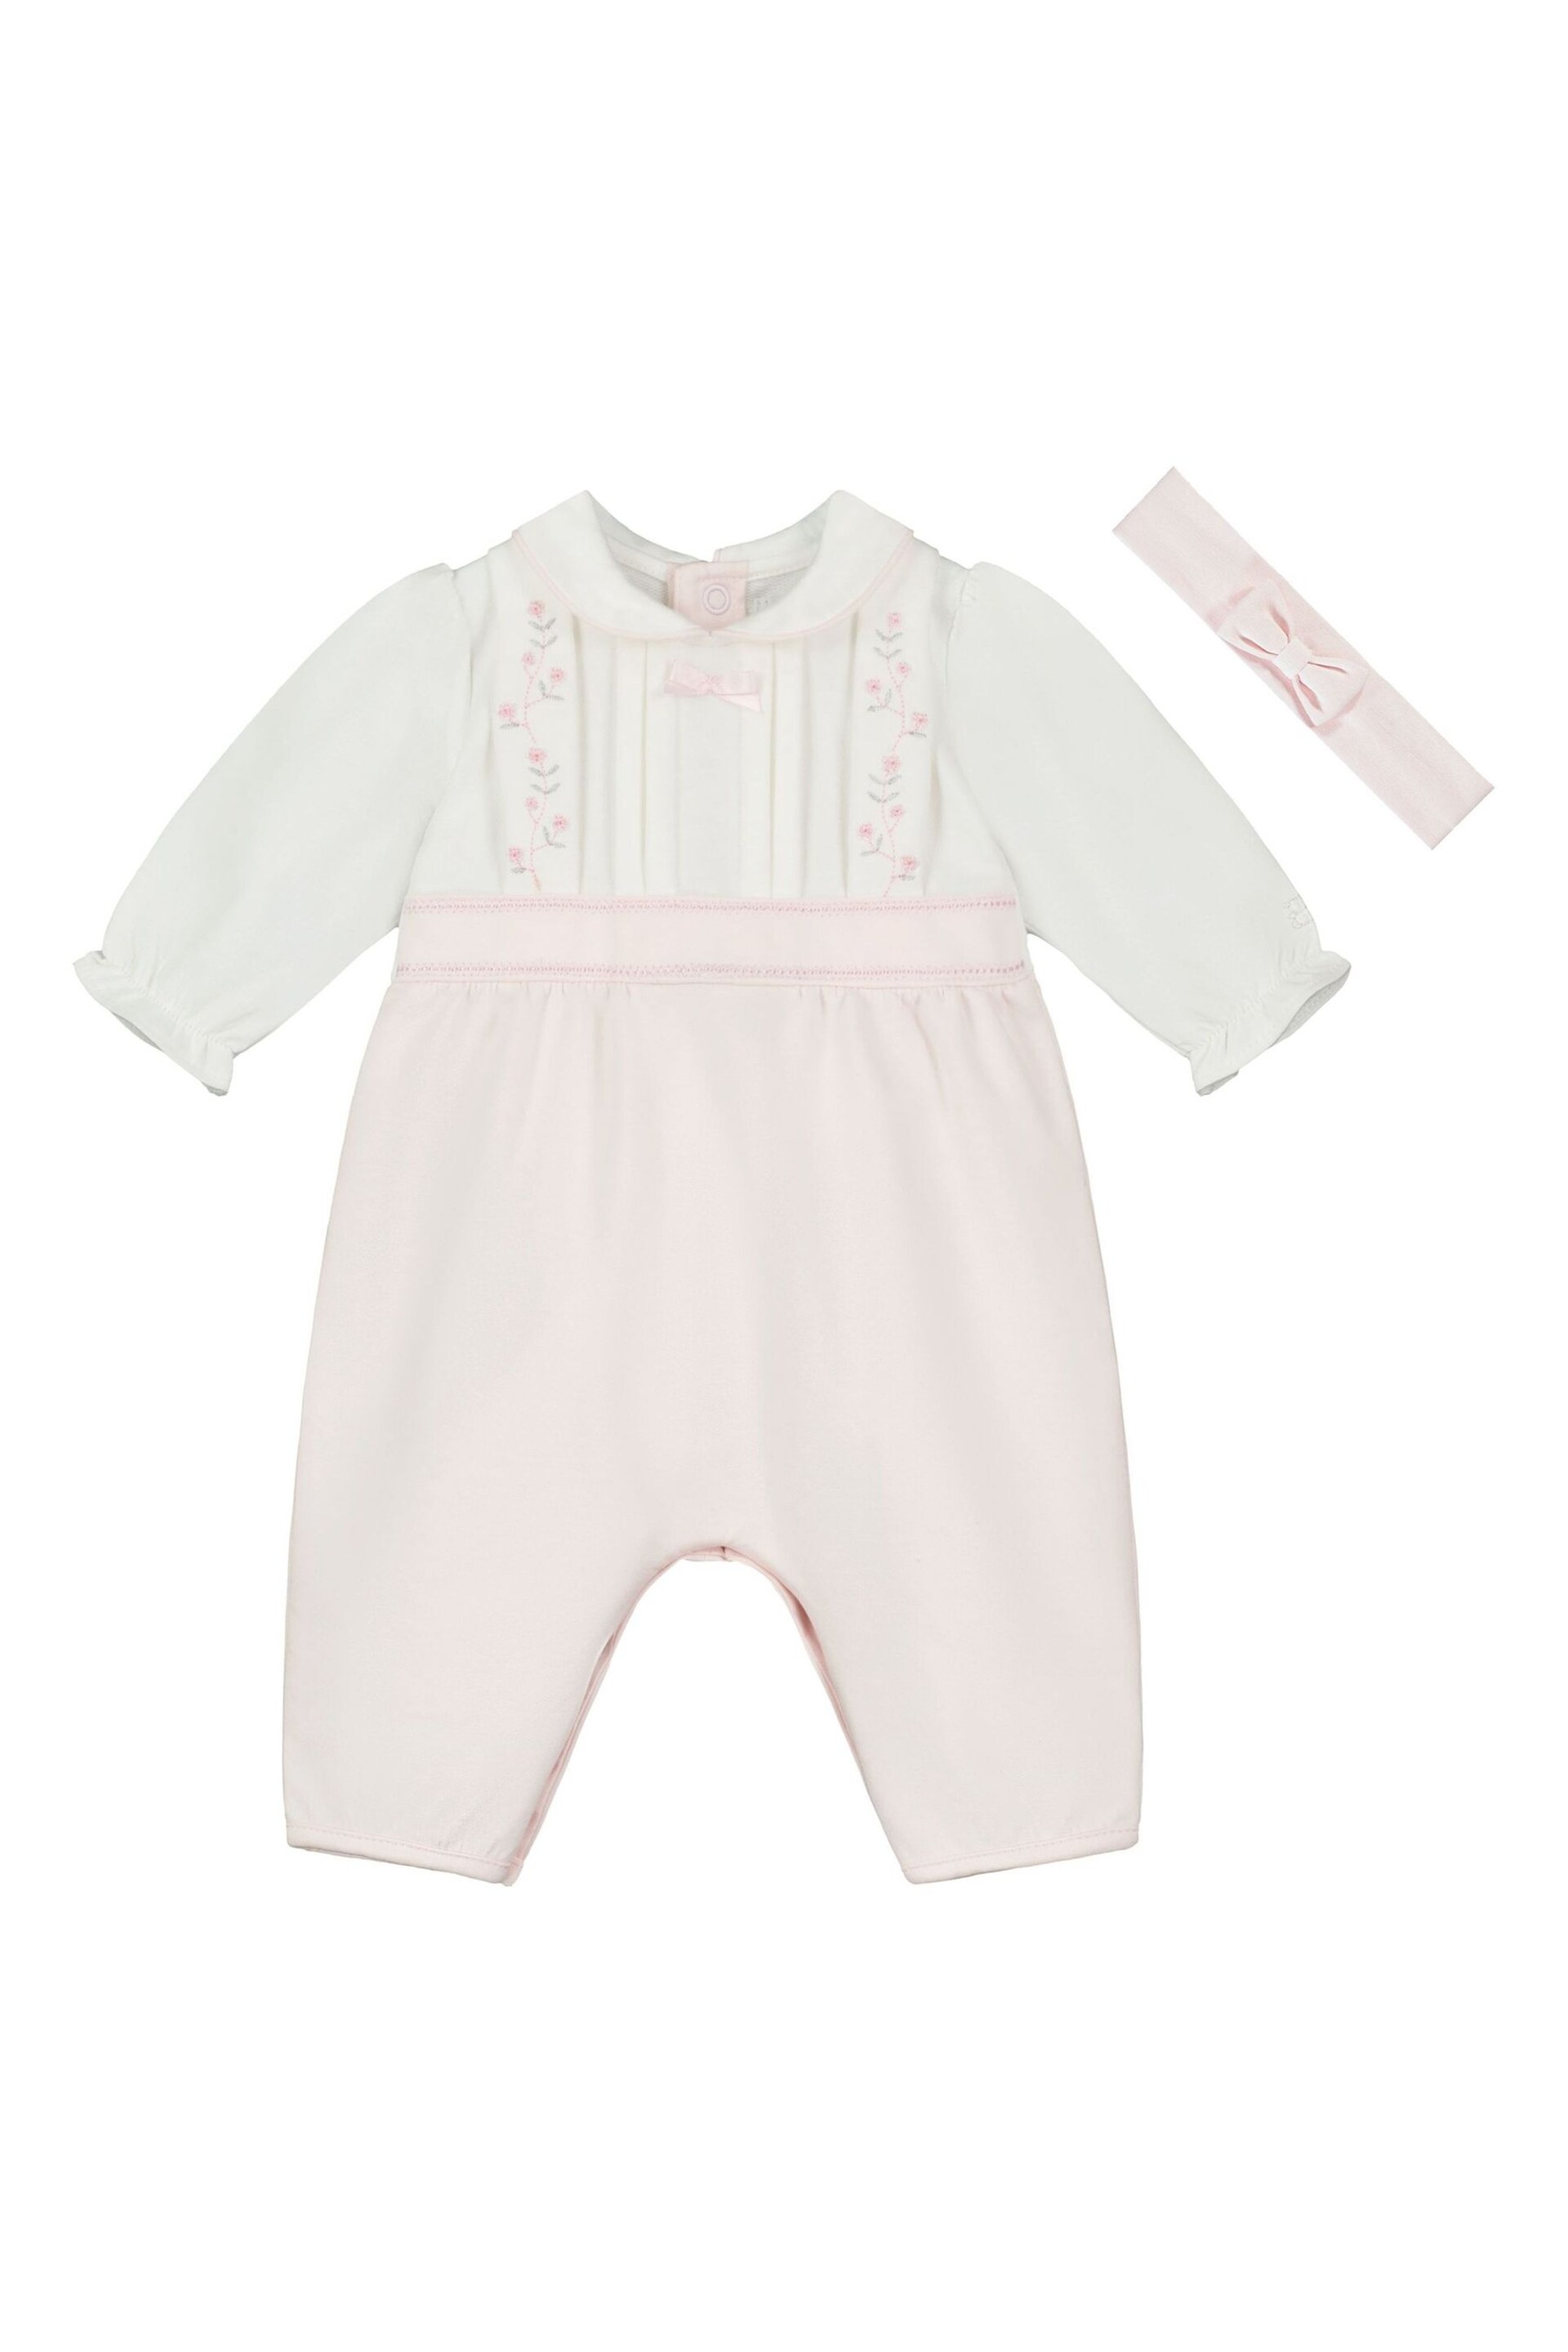 Emile et Rose Pink All In One with emb pleats, Pink lower & H/B - Image 2 of 5